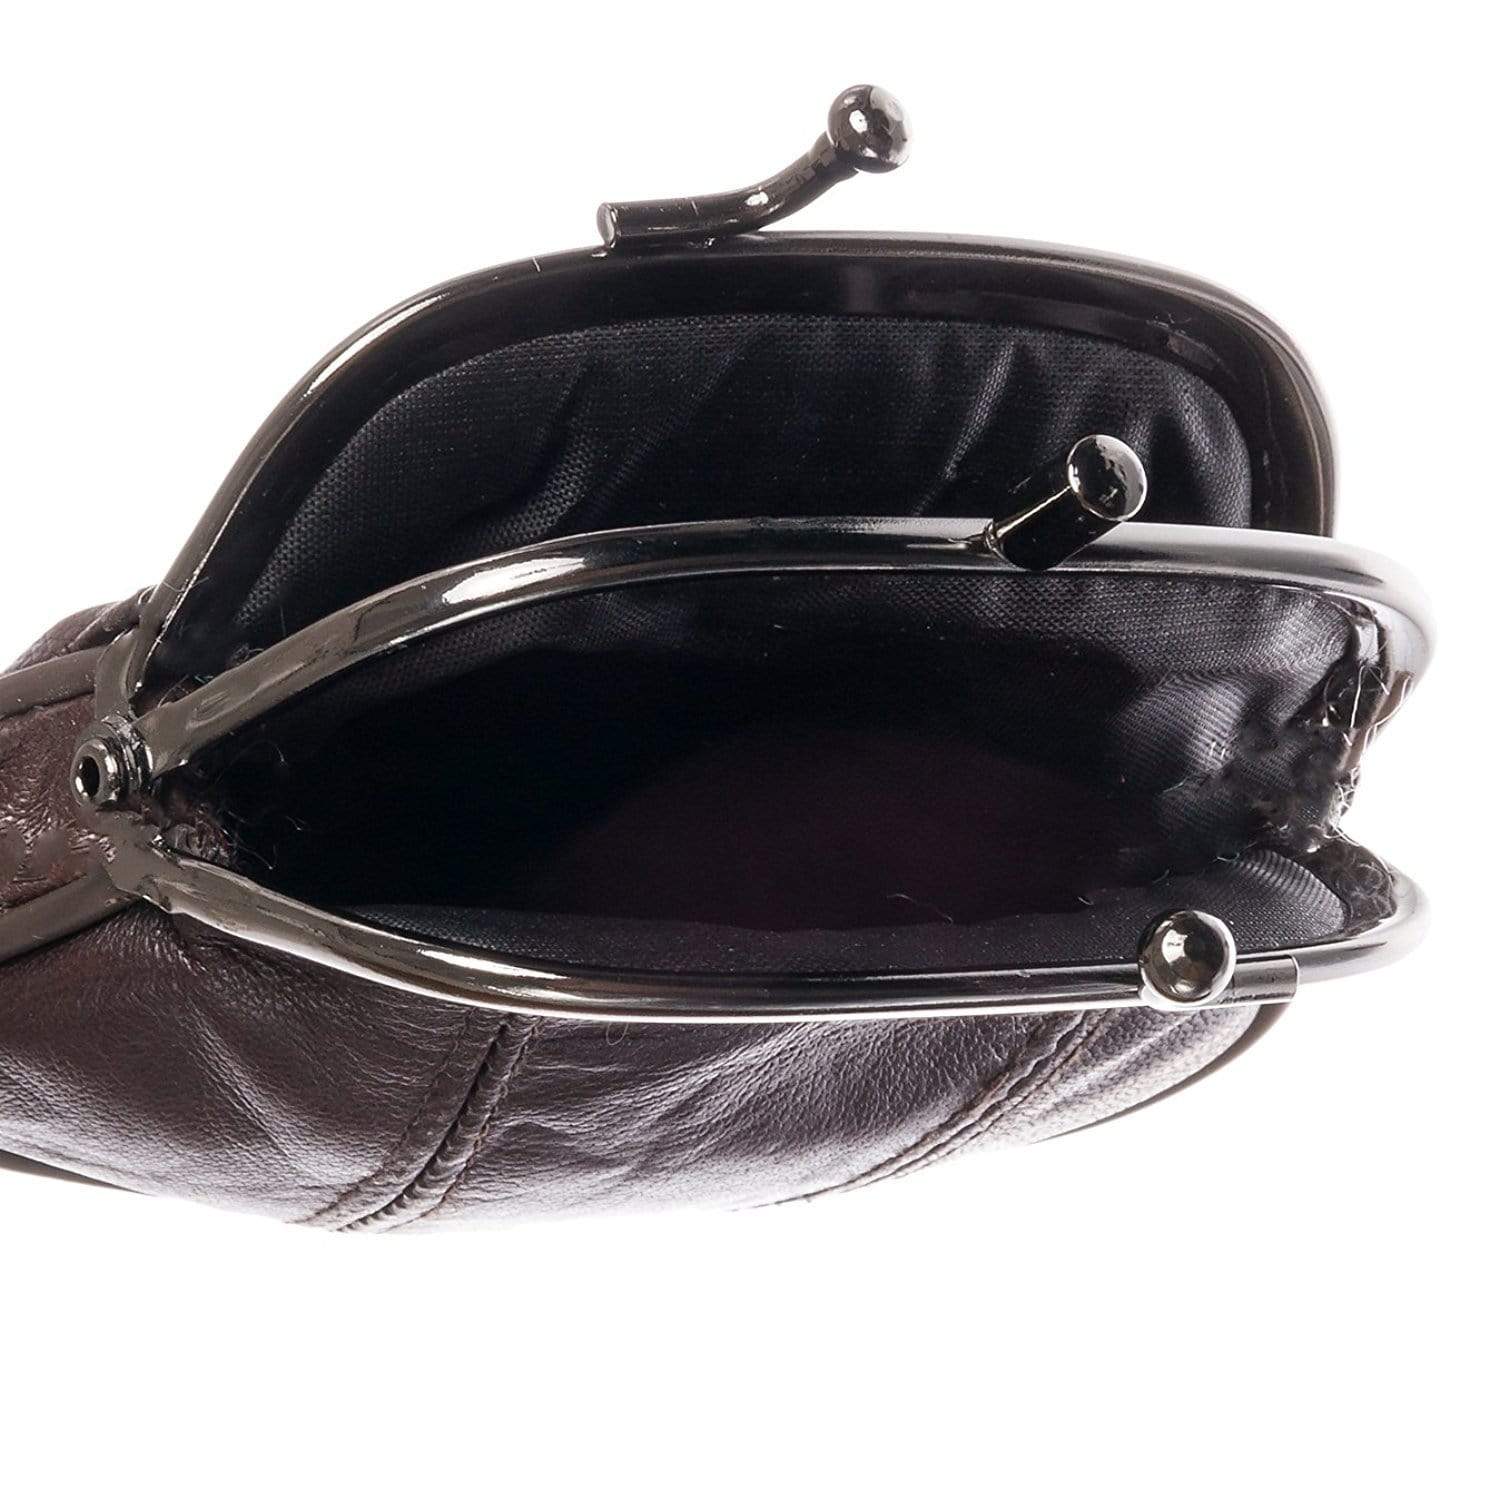 Kisslock Leather Change Purse with Clasp and Zipper Bottom Pouch Black